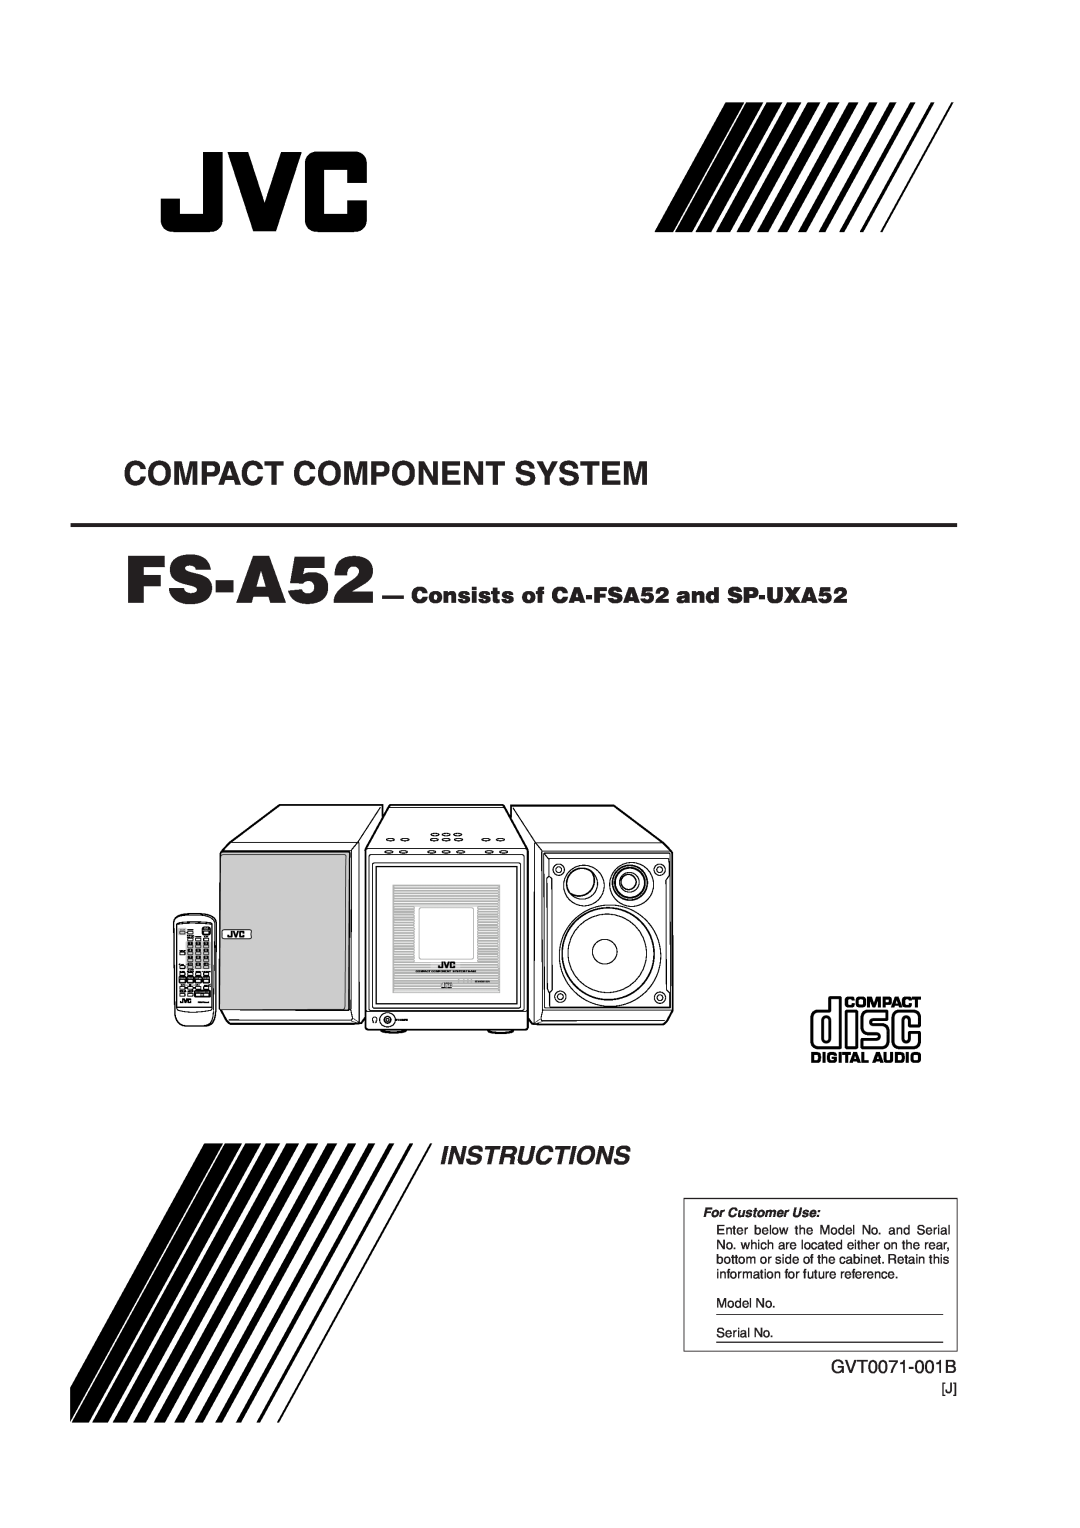 JVC manual FS-A52 - Consists of CA-FSA52and SP-UXA52, Compact Component System, Instructions, GVT0071-001B, Standby/On 